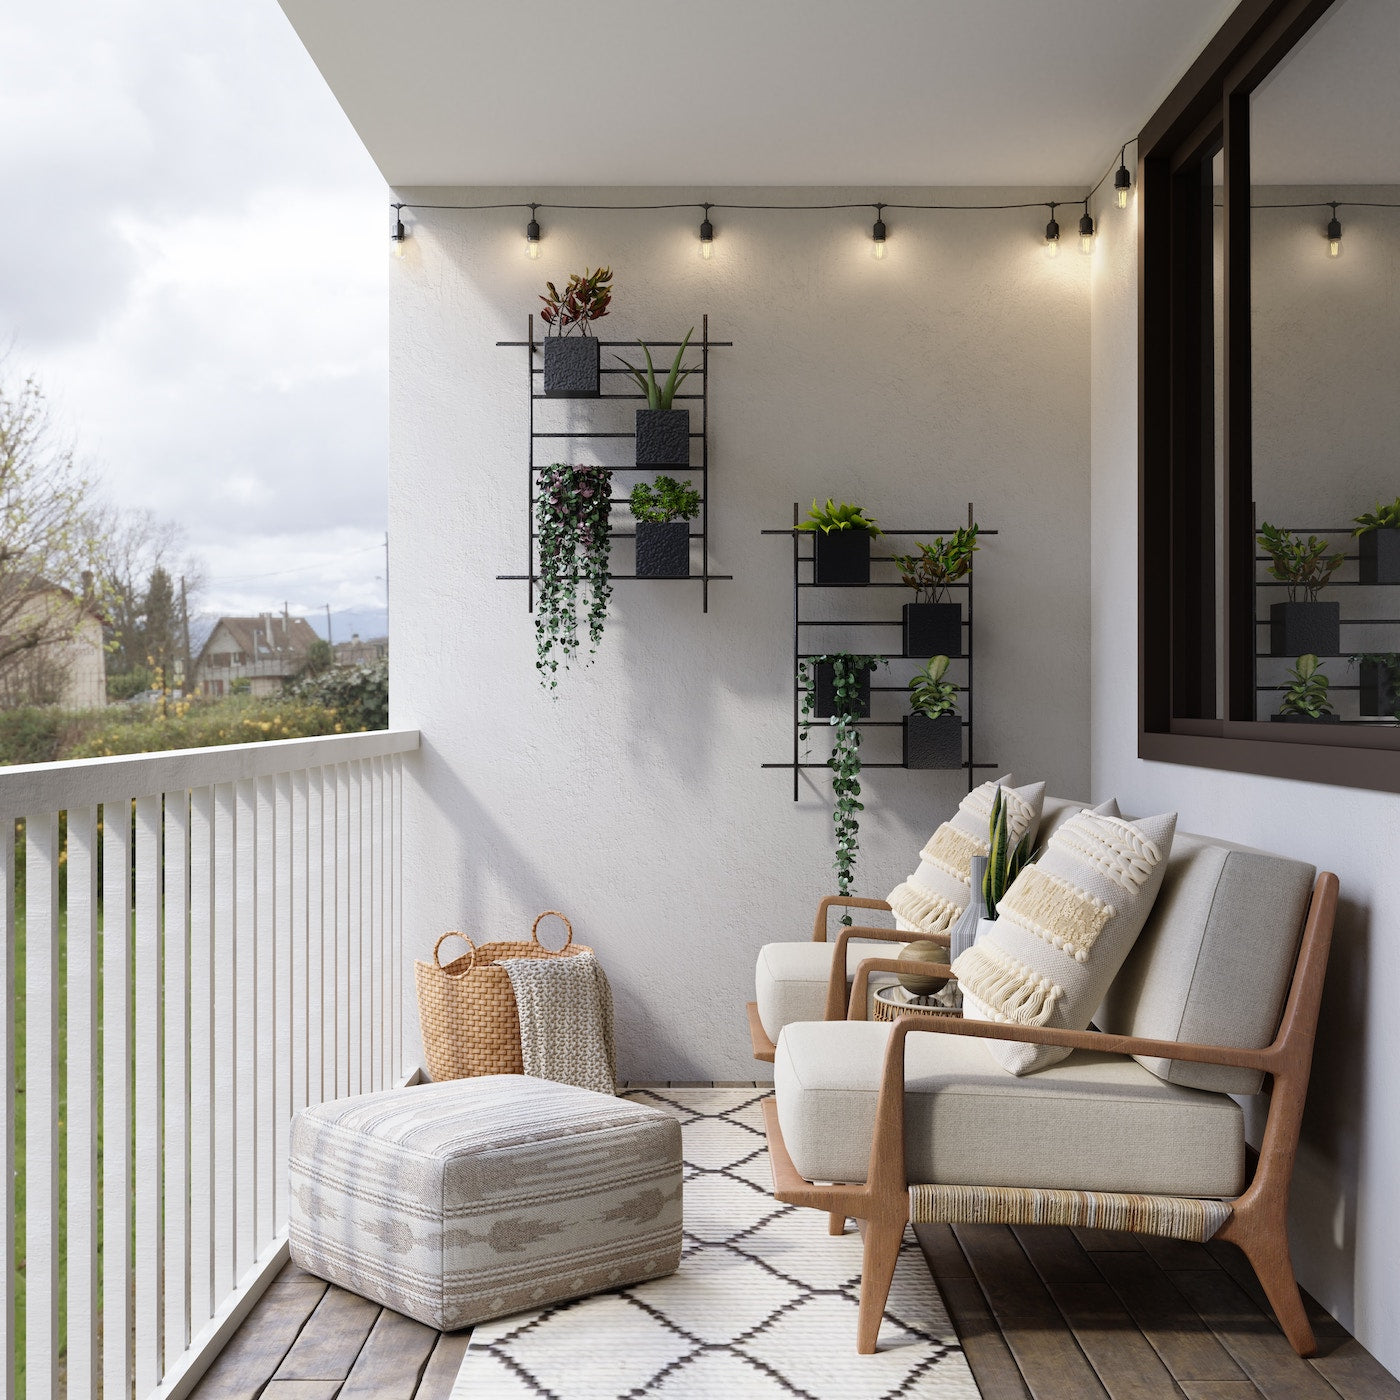 Modern white and beige balcony with comfortable seating and hanging shelves for plants.